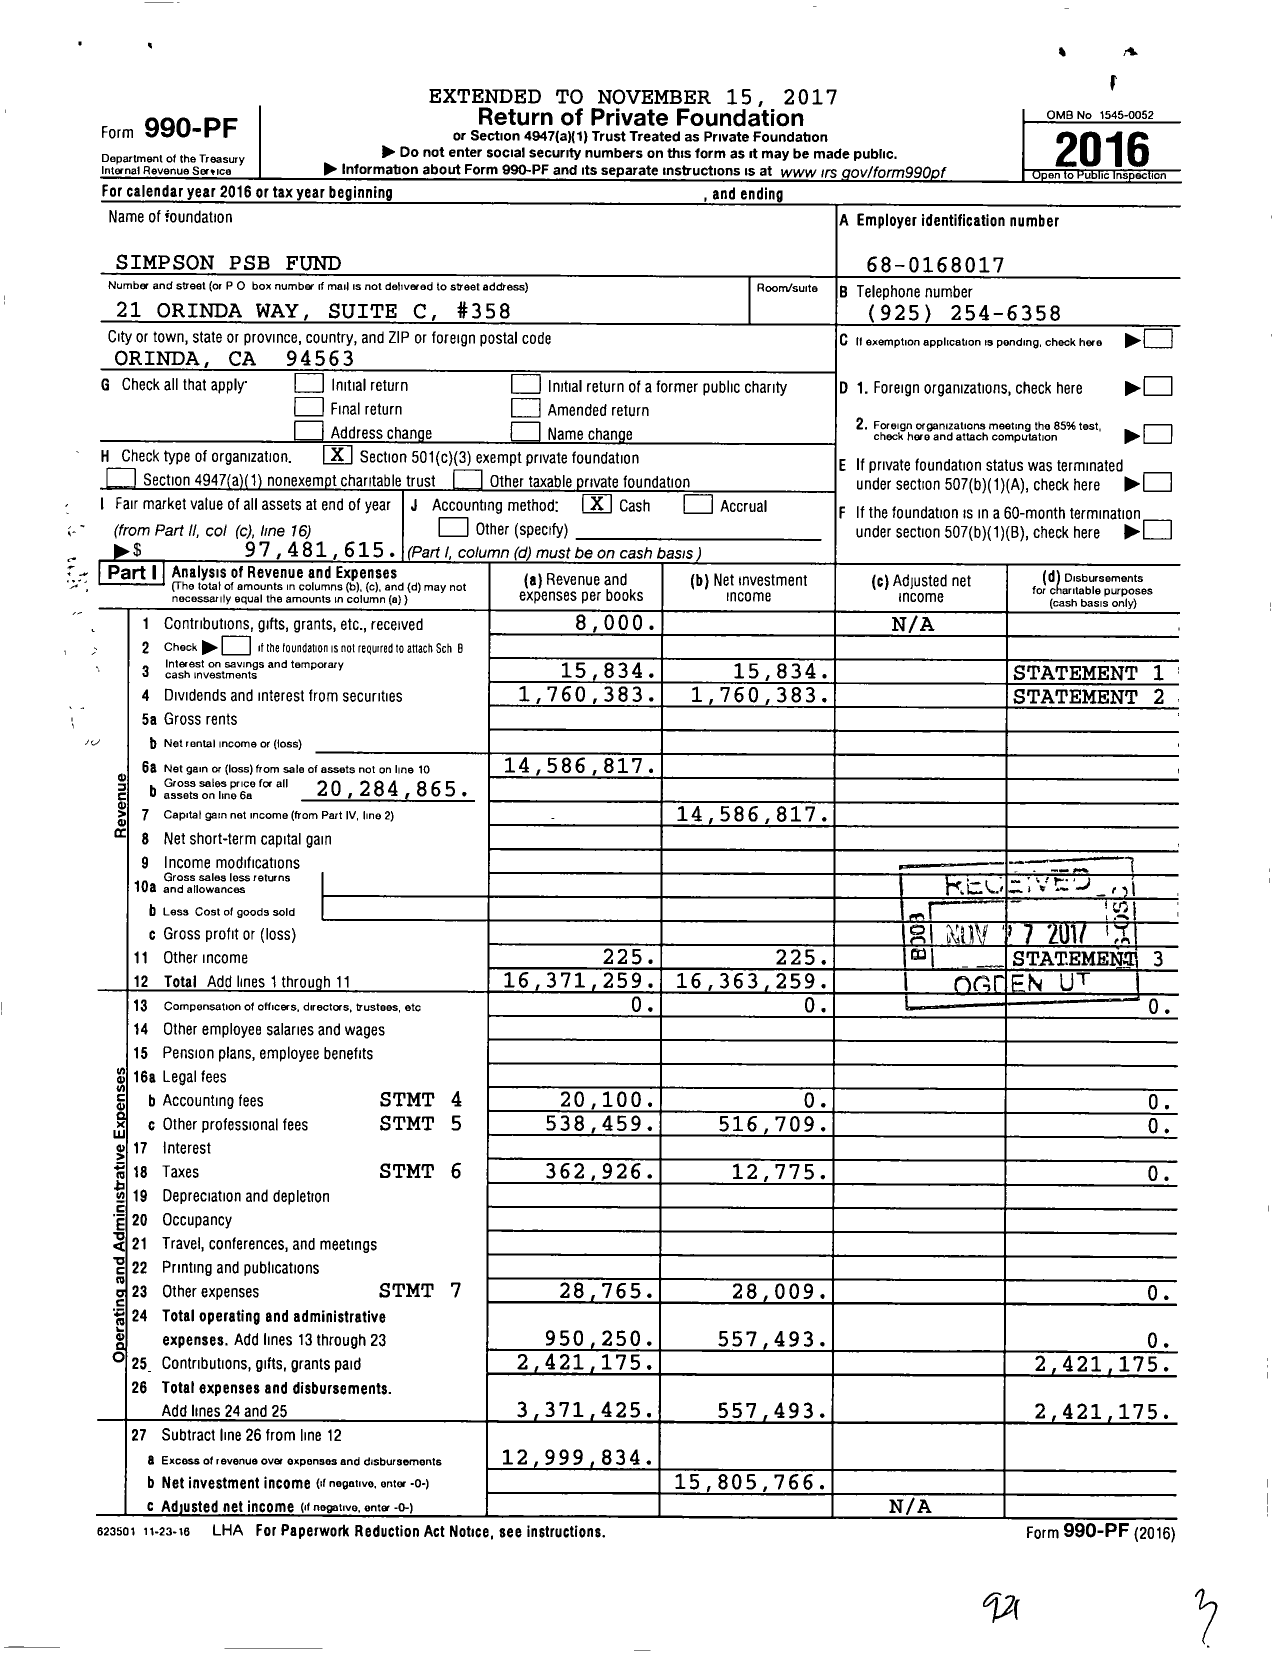 Image of first page of 2016 Form 990PF for Simpson Psb Fund